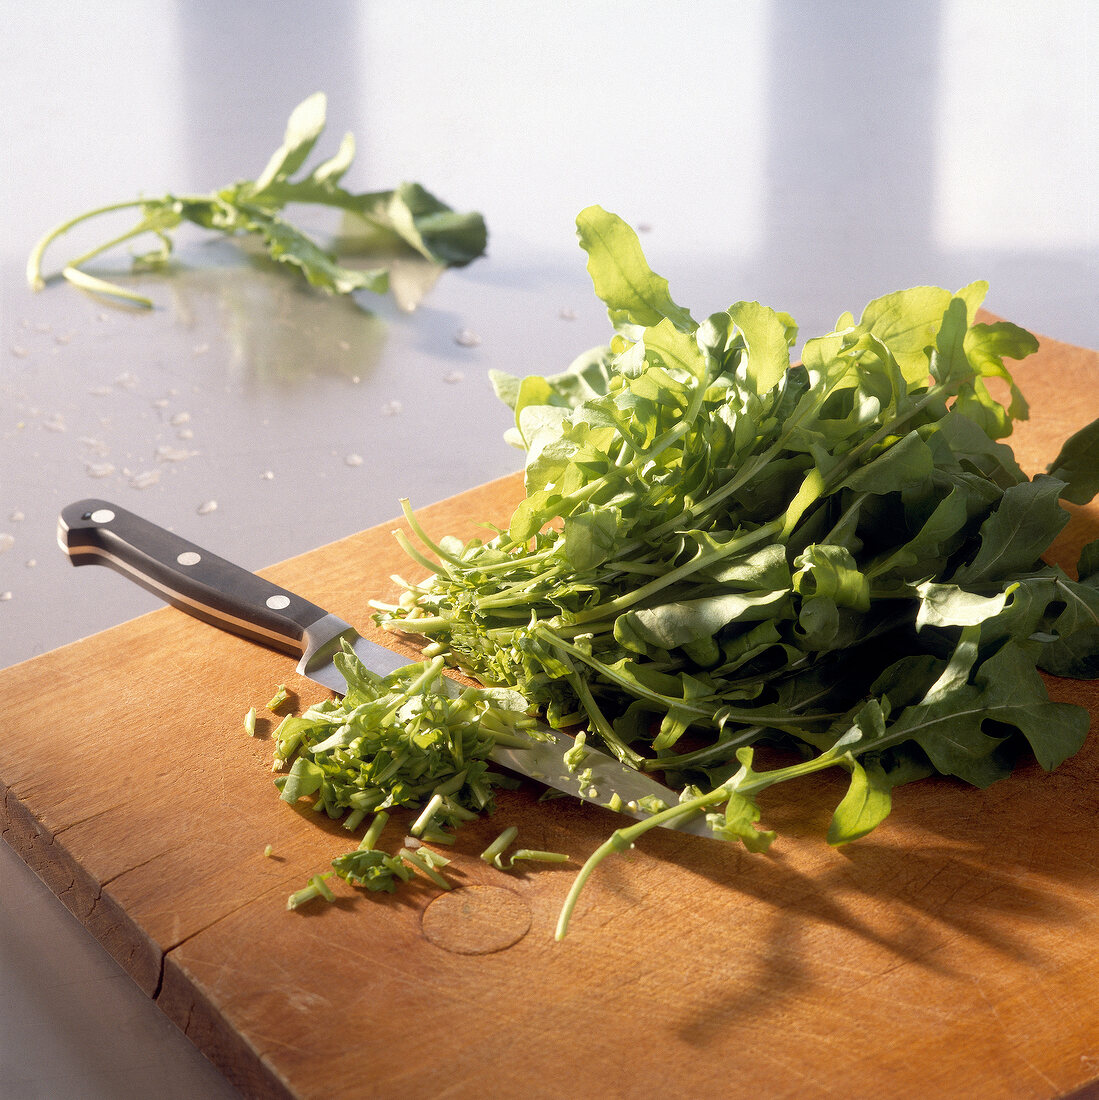 The lower thick stalks of fresh rocket cut on wooden cutting board